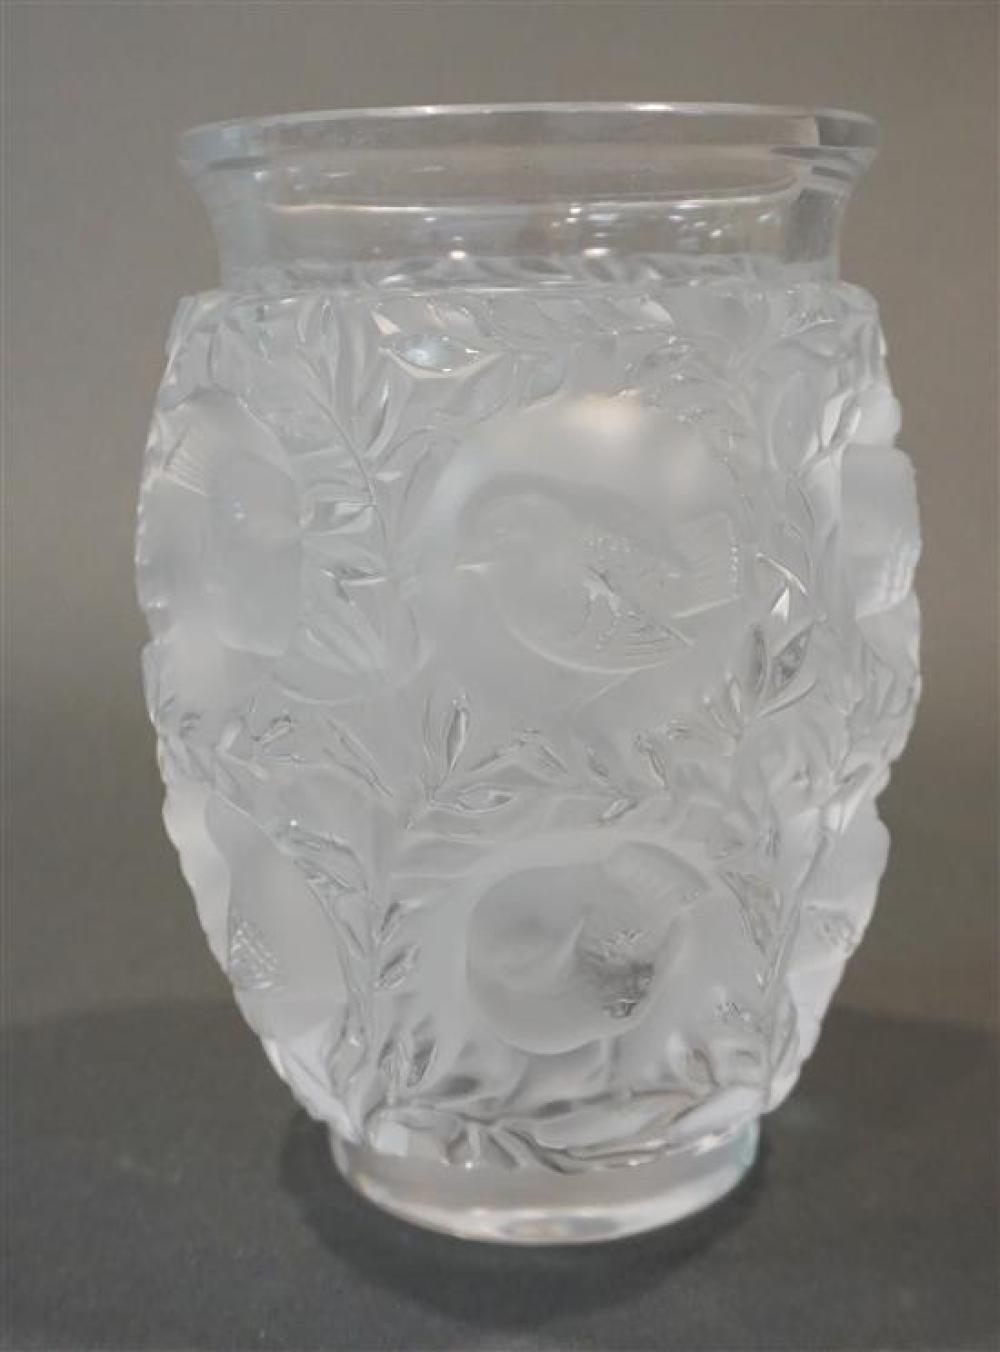 LALIQUE FROSTED GLASS 'BAGATELLE'